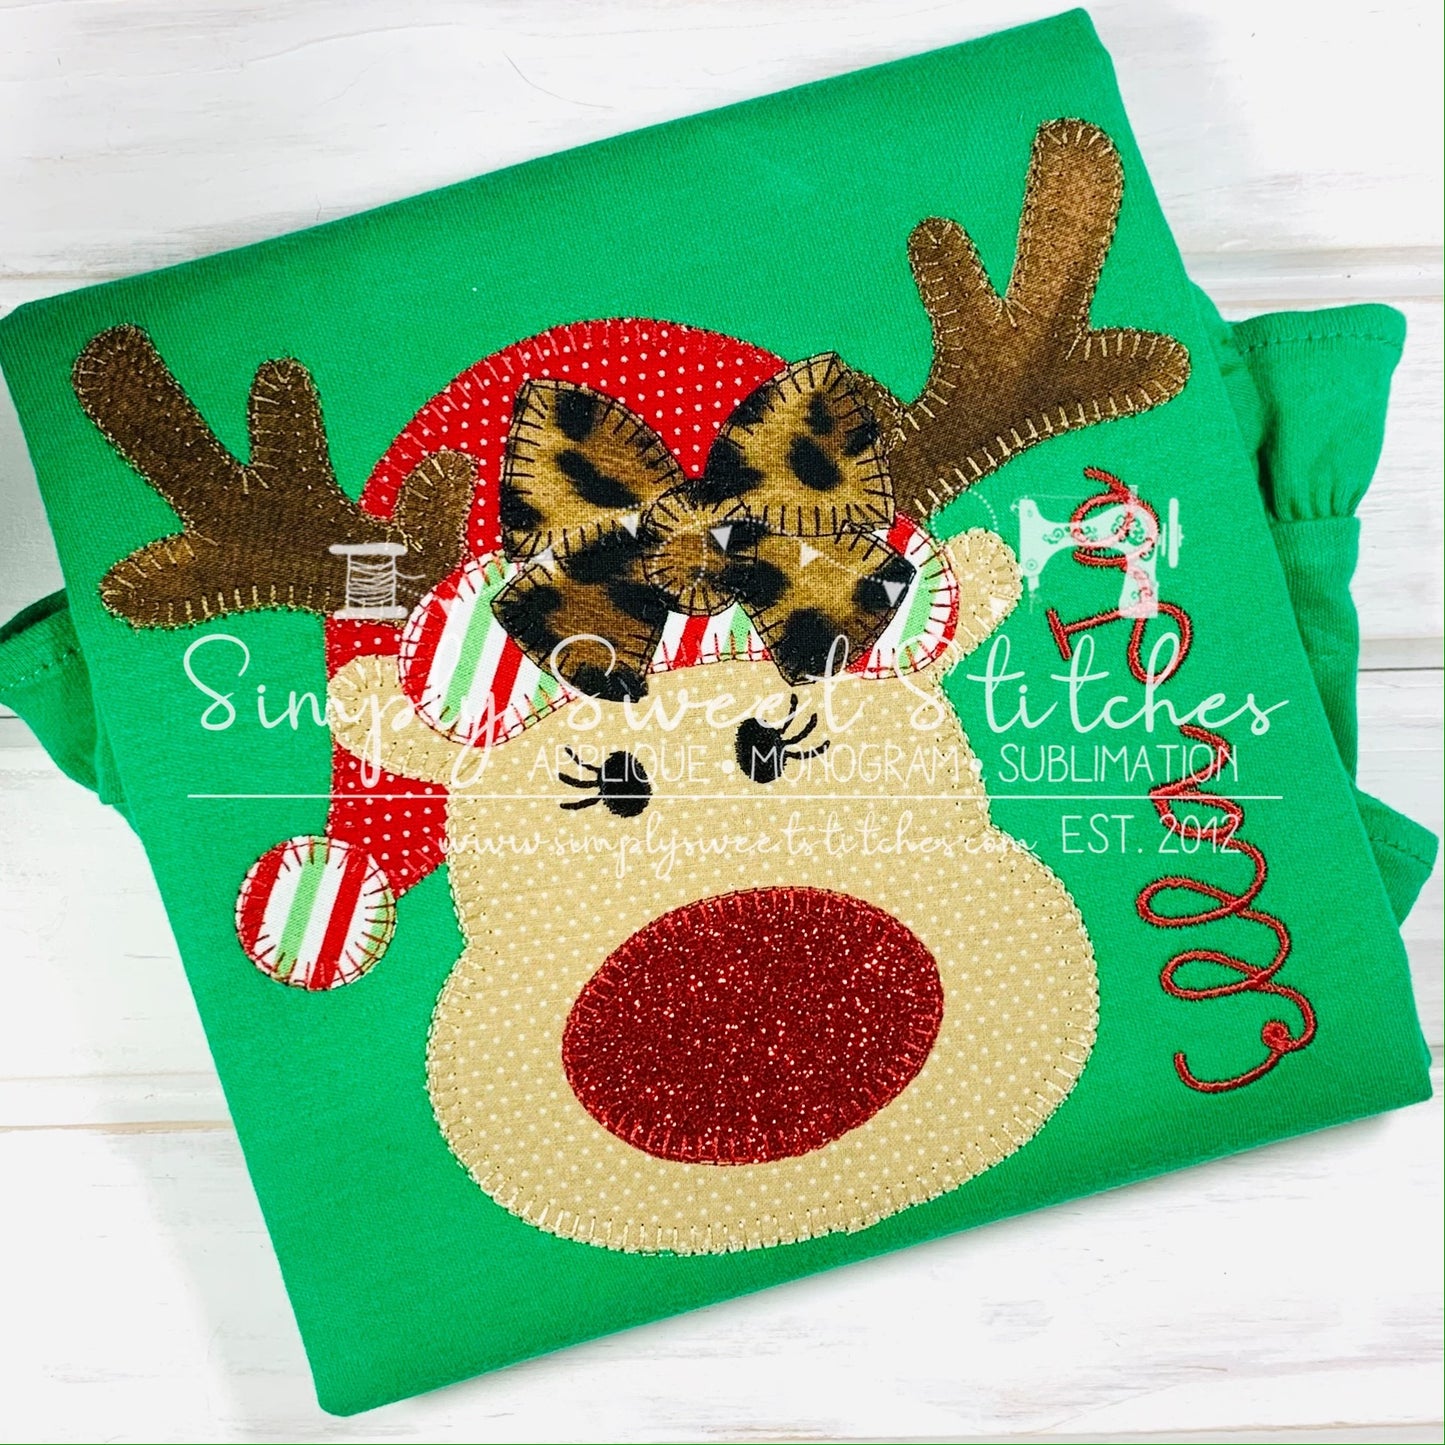 1502  - REINDEER HAT WITH BOW APPLIQUE - CHILD SHIRT